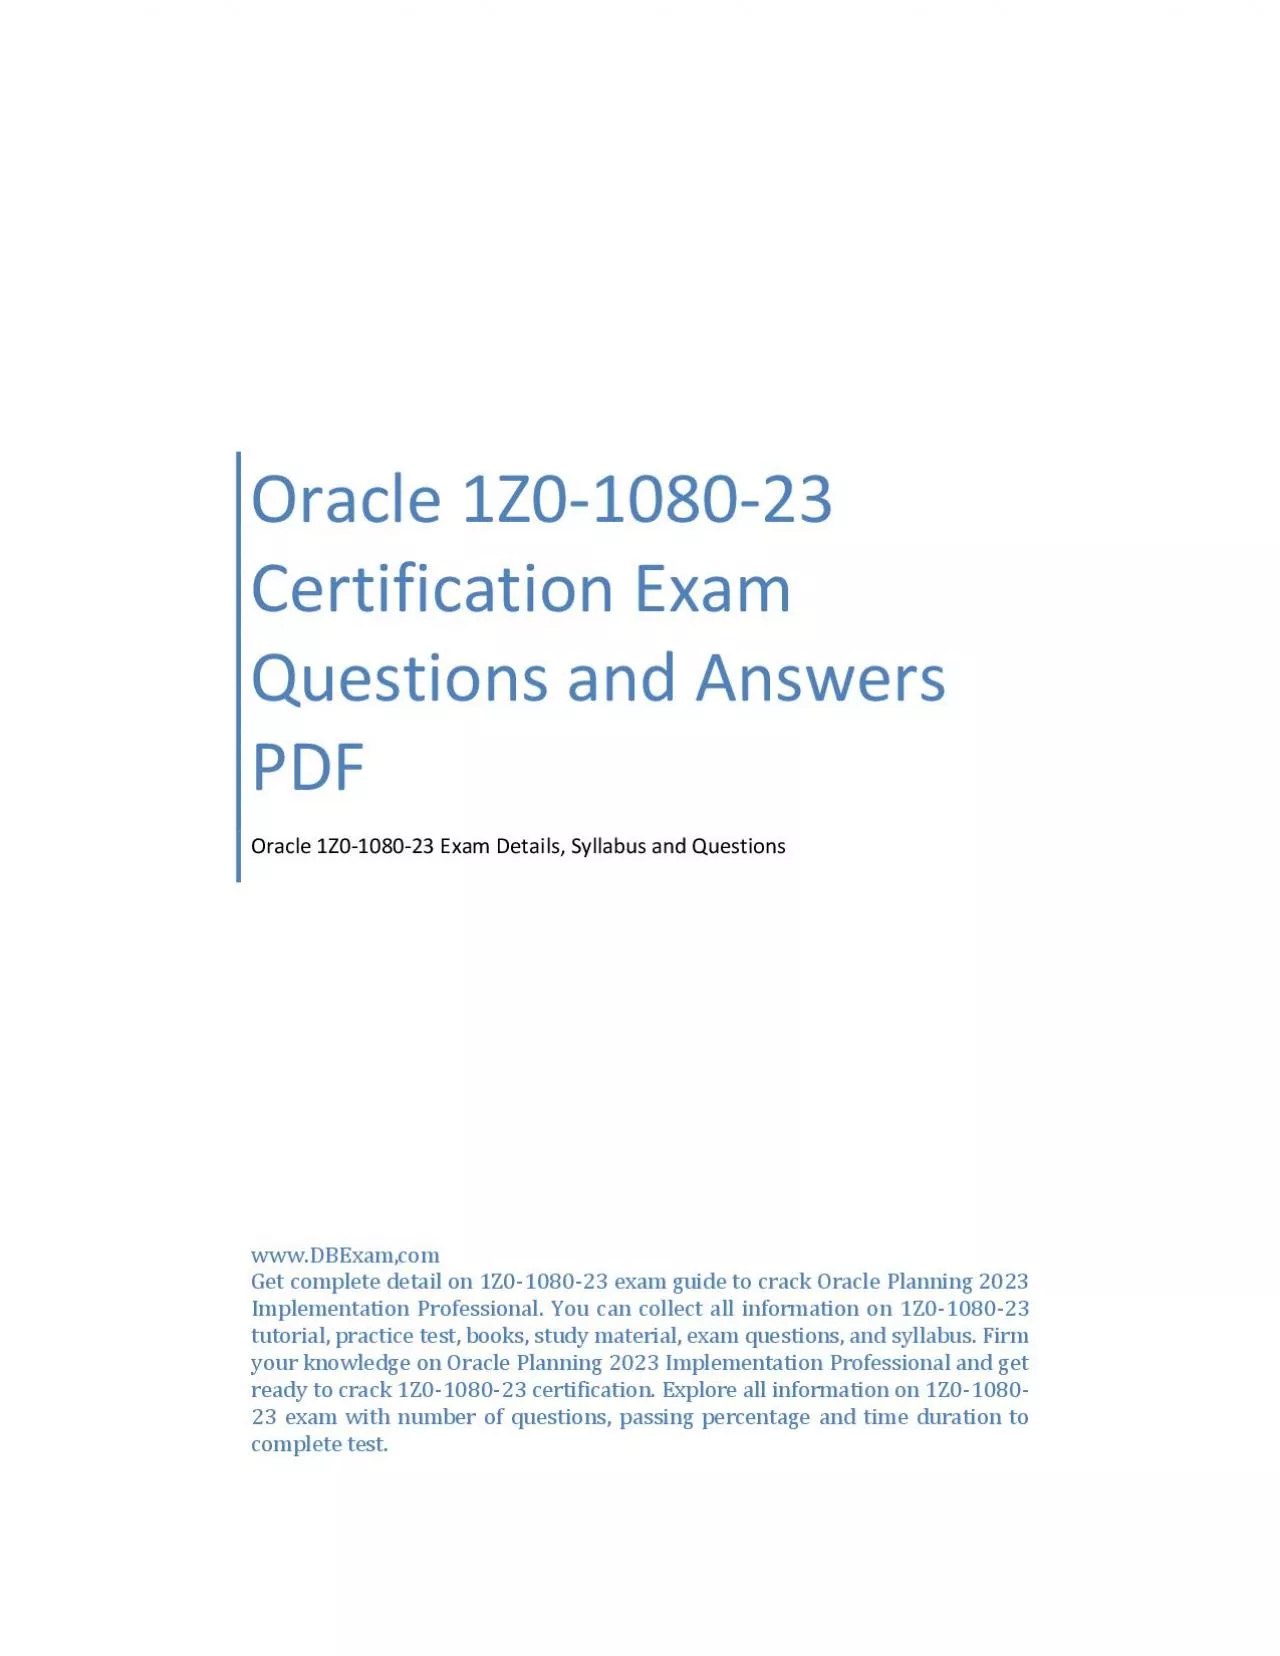 Oracle 1Z0-1080-23 Certification Exam Questions and Answers PDF 